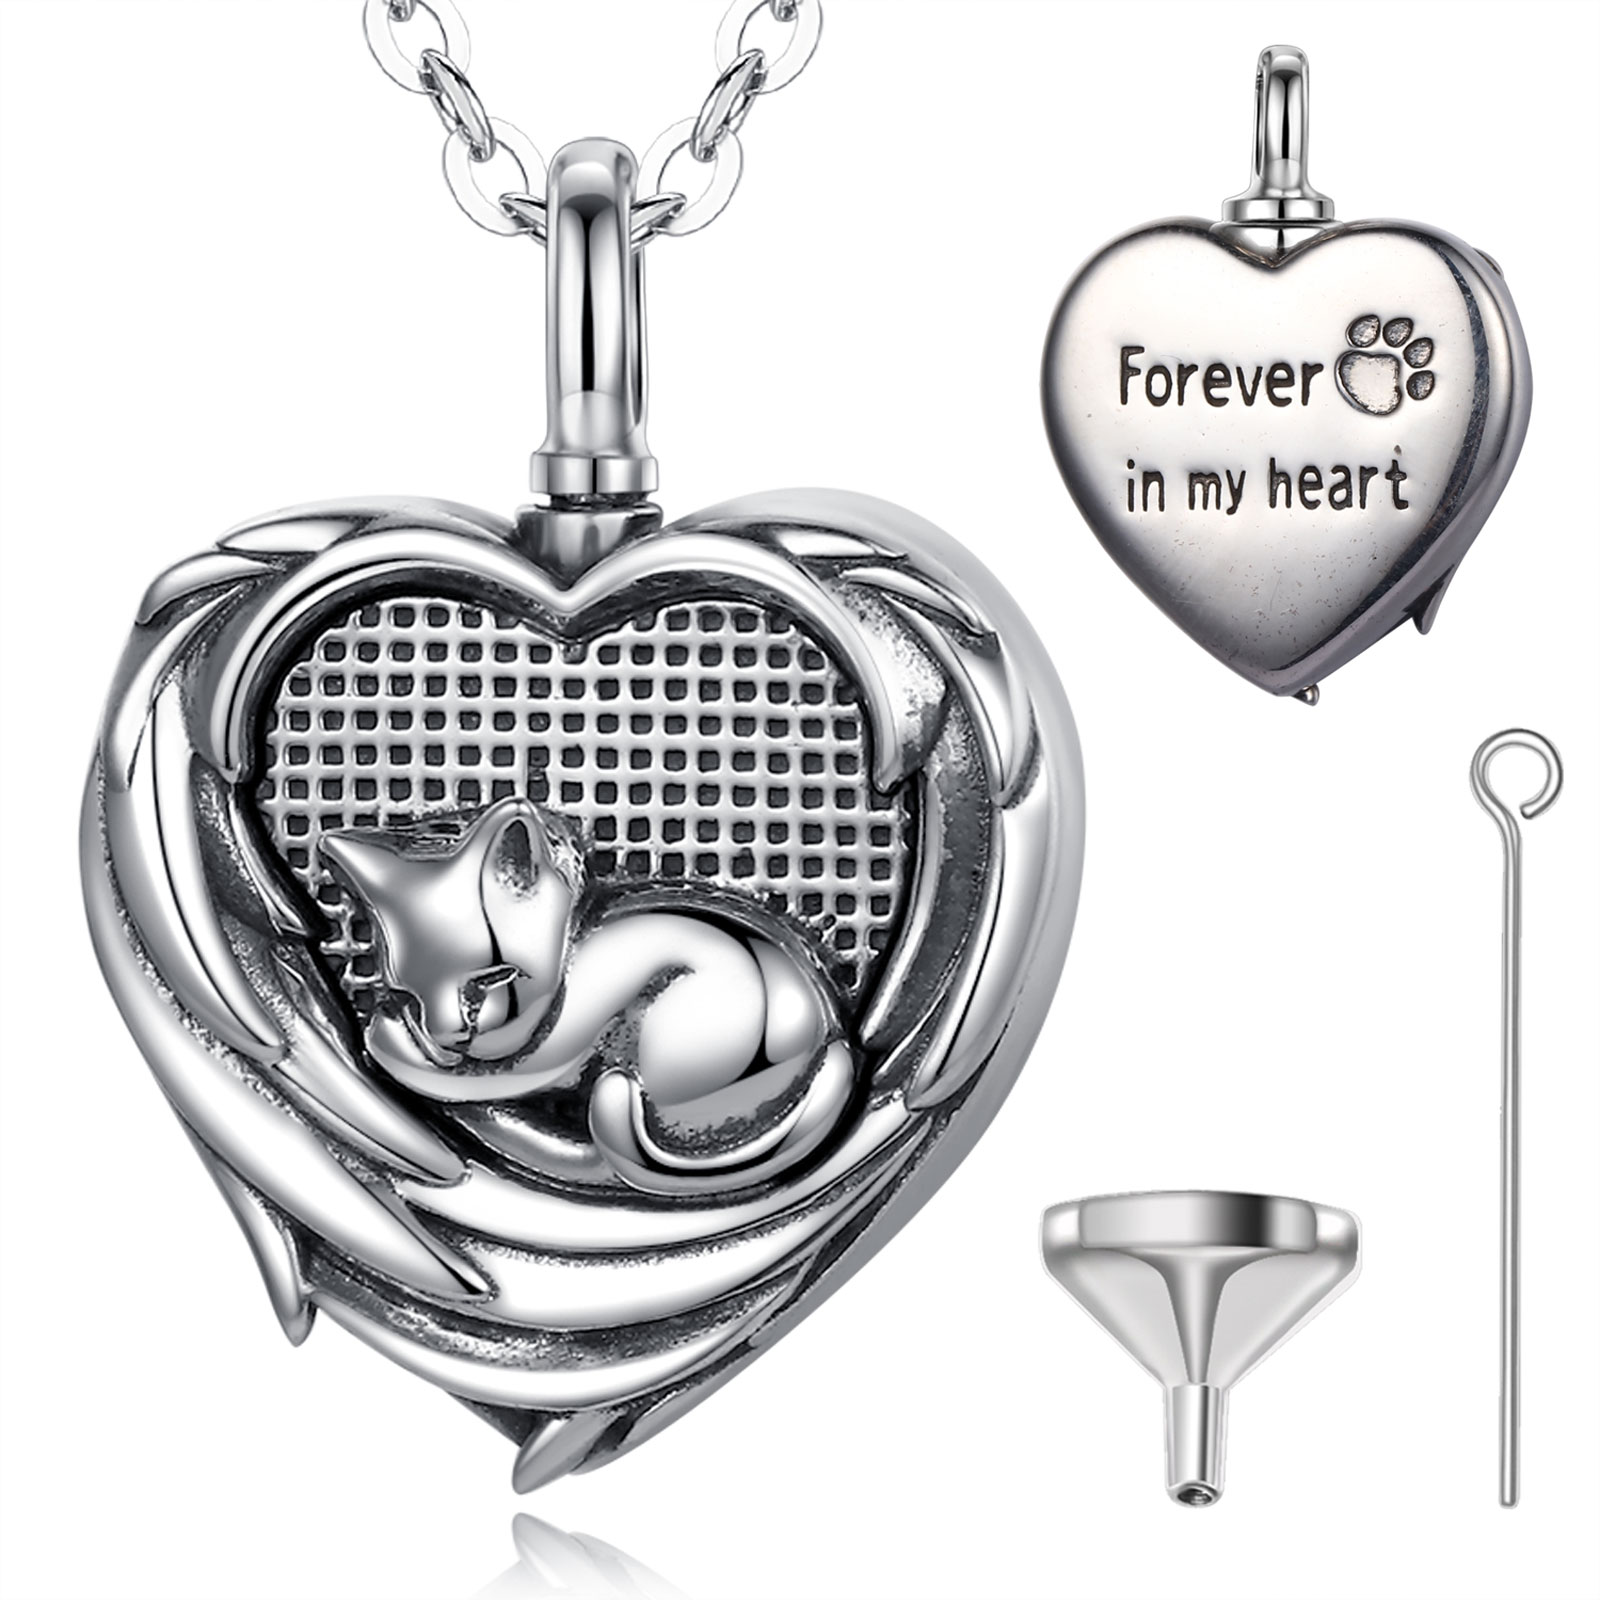 Merryshine keepsake cremation jewelry sterling silver heart memorial urn necklaces for ashes